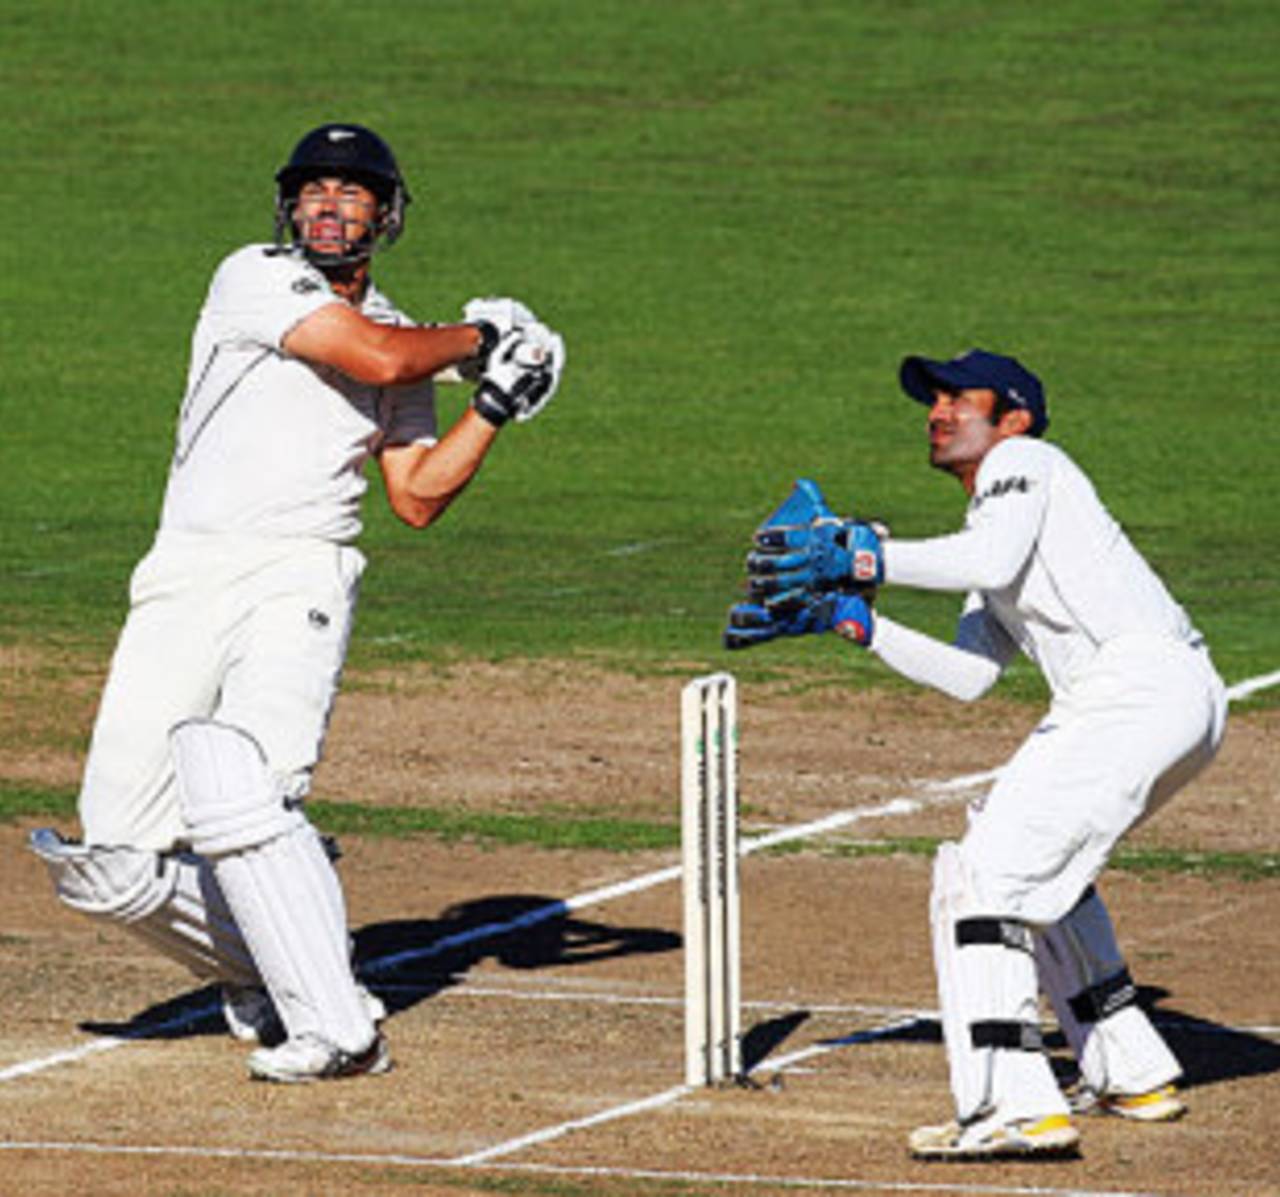 Ross Taylor goes on the attack as Dinesh Karthik looks on, New Zealand v India, 2nd Test, Napier, 1st day, March 26, 2009